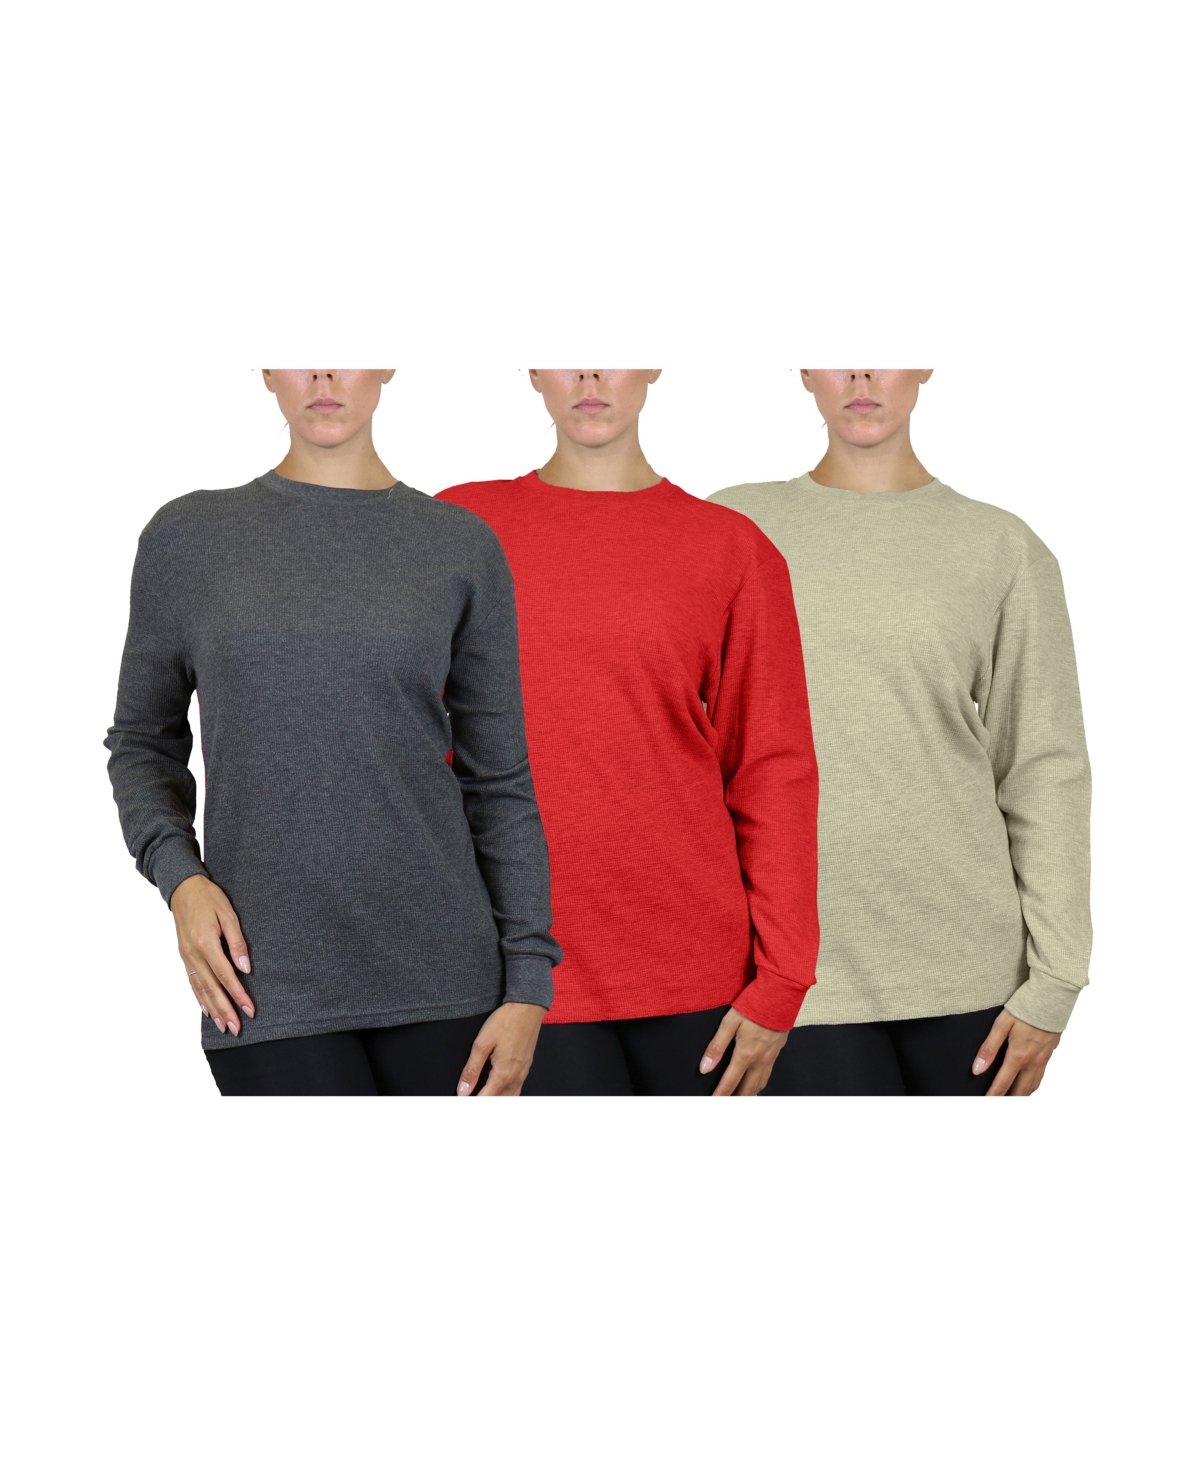 Shop Galaxy By Harvic Women's Loose Fit Waffle Knit Thermal Shirt, Pack Of 3 In Charocal,red,heather Oatmeal